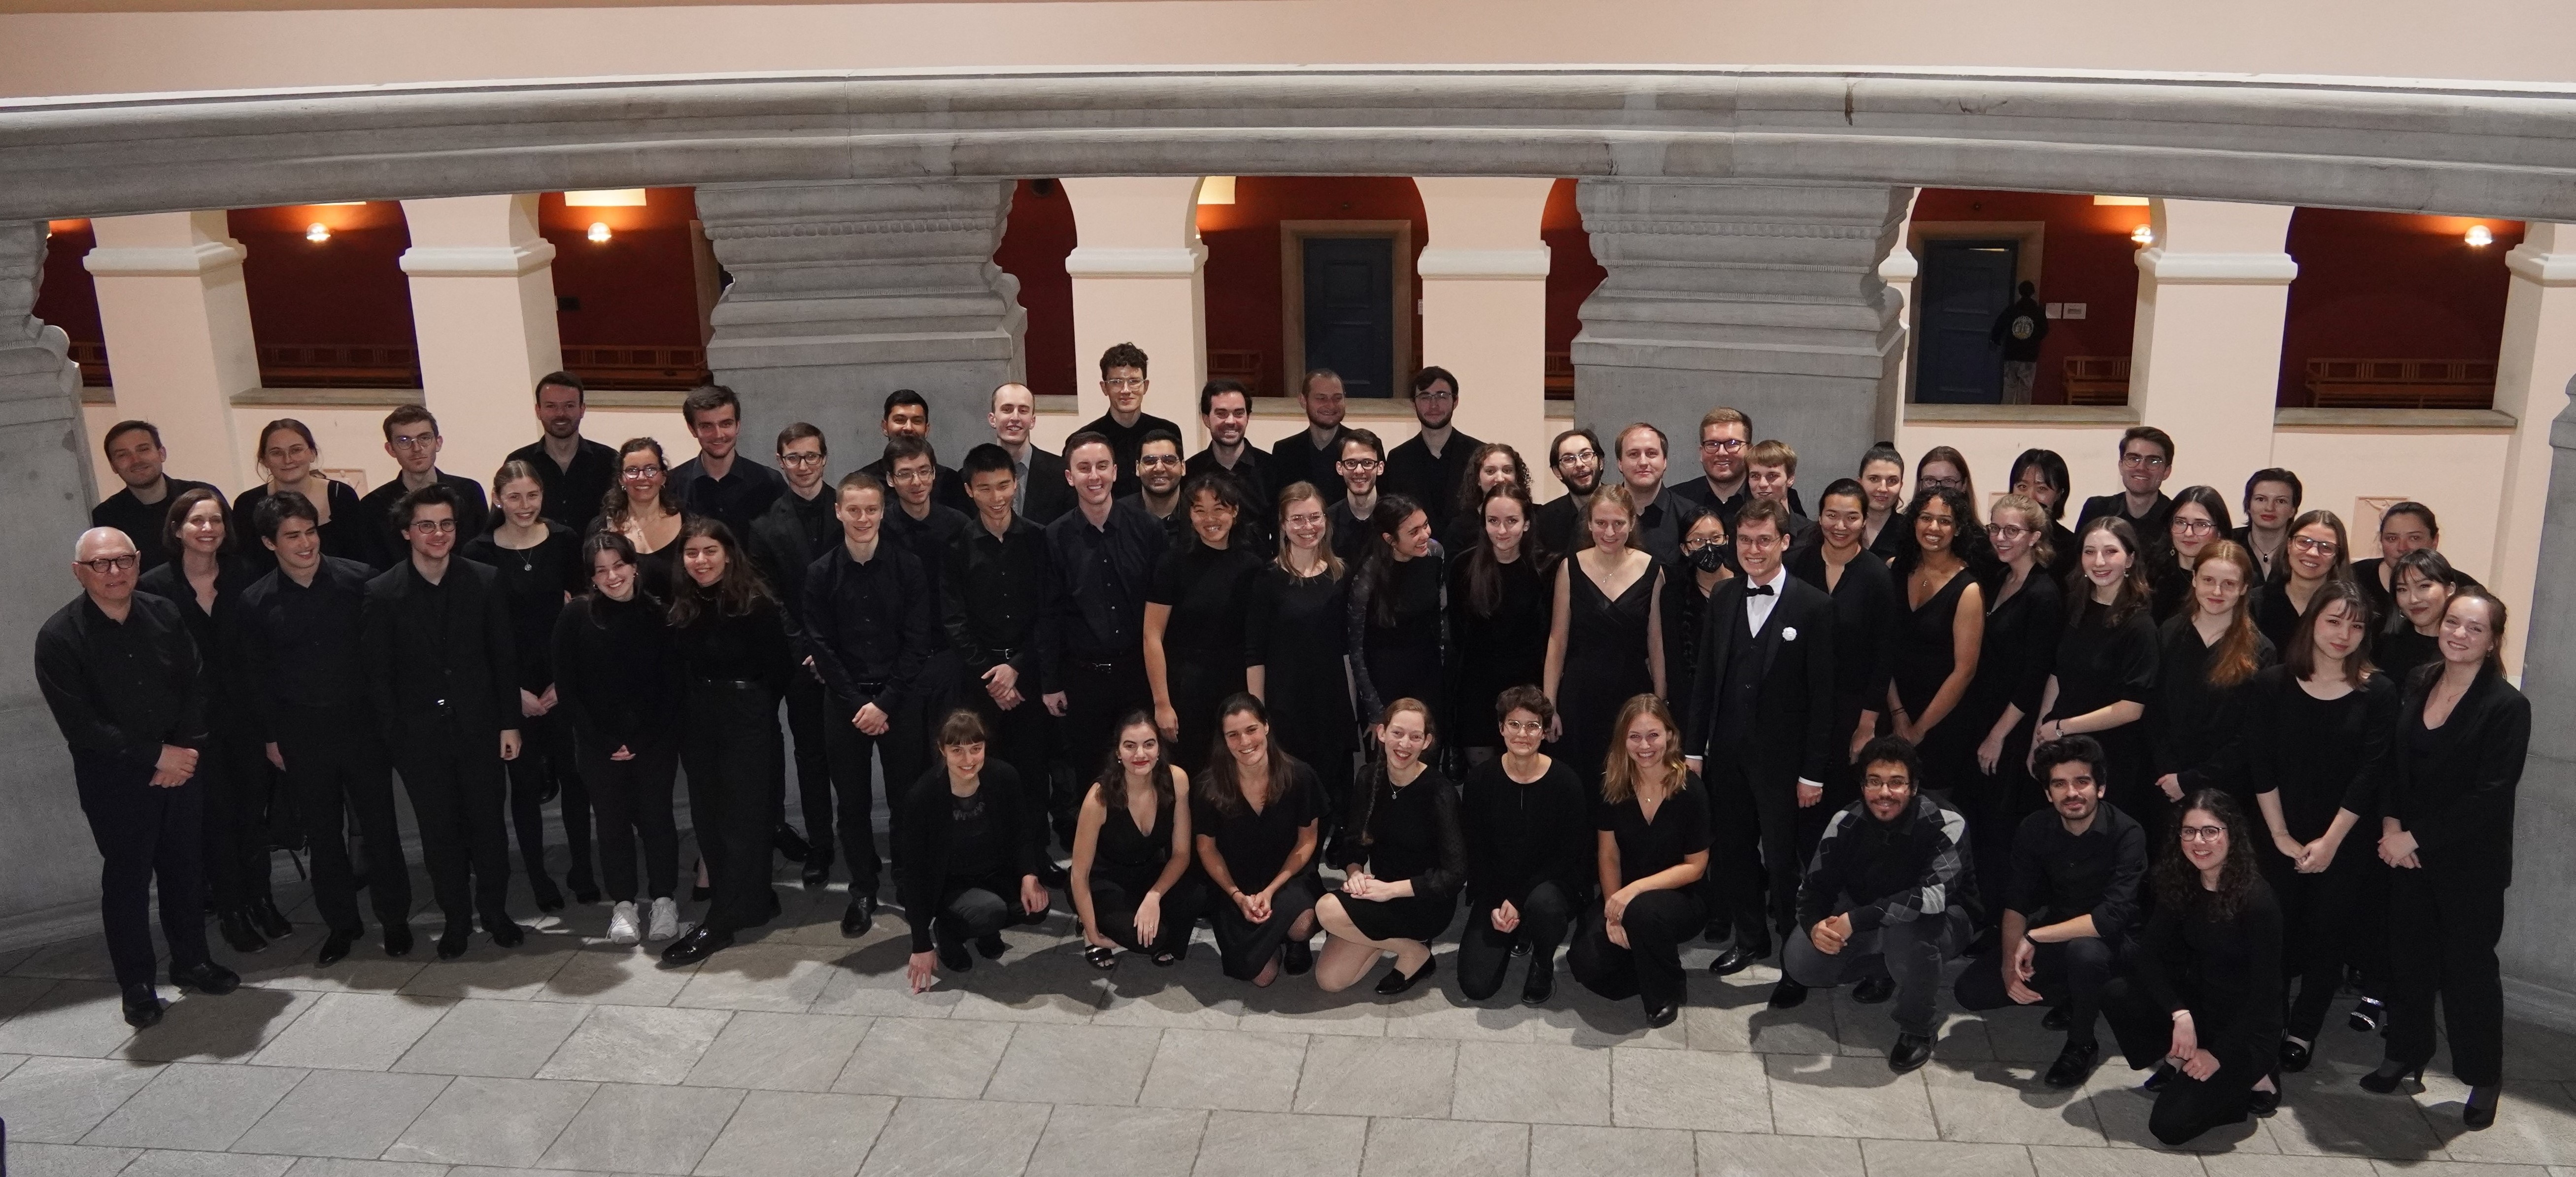 Orchestra group picture